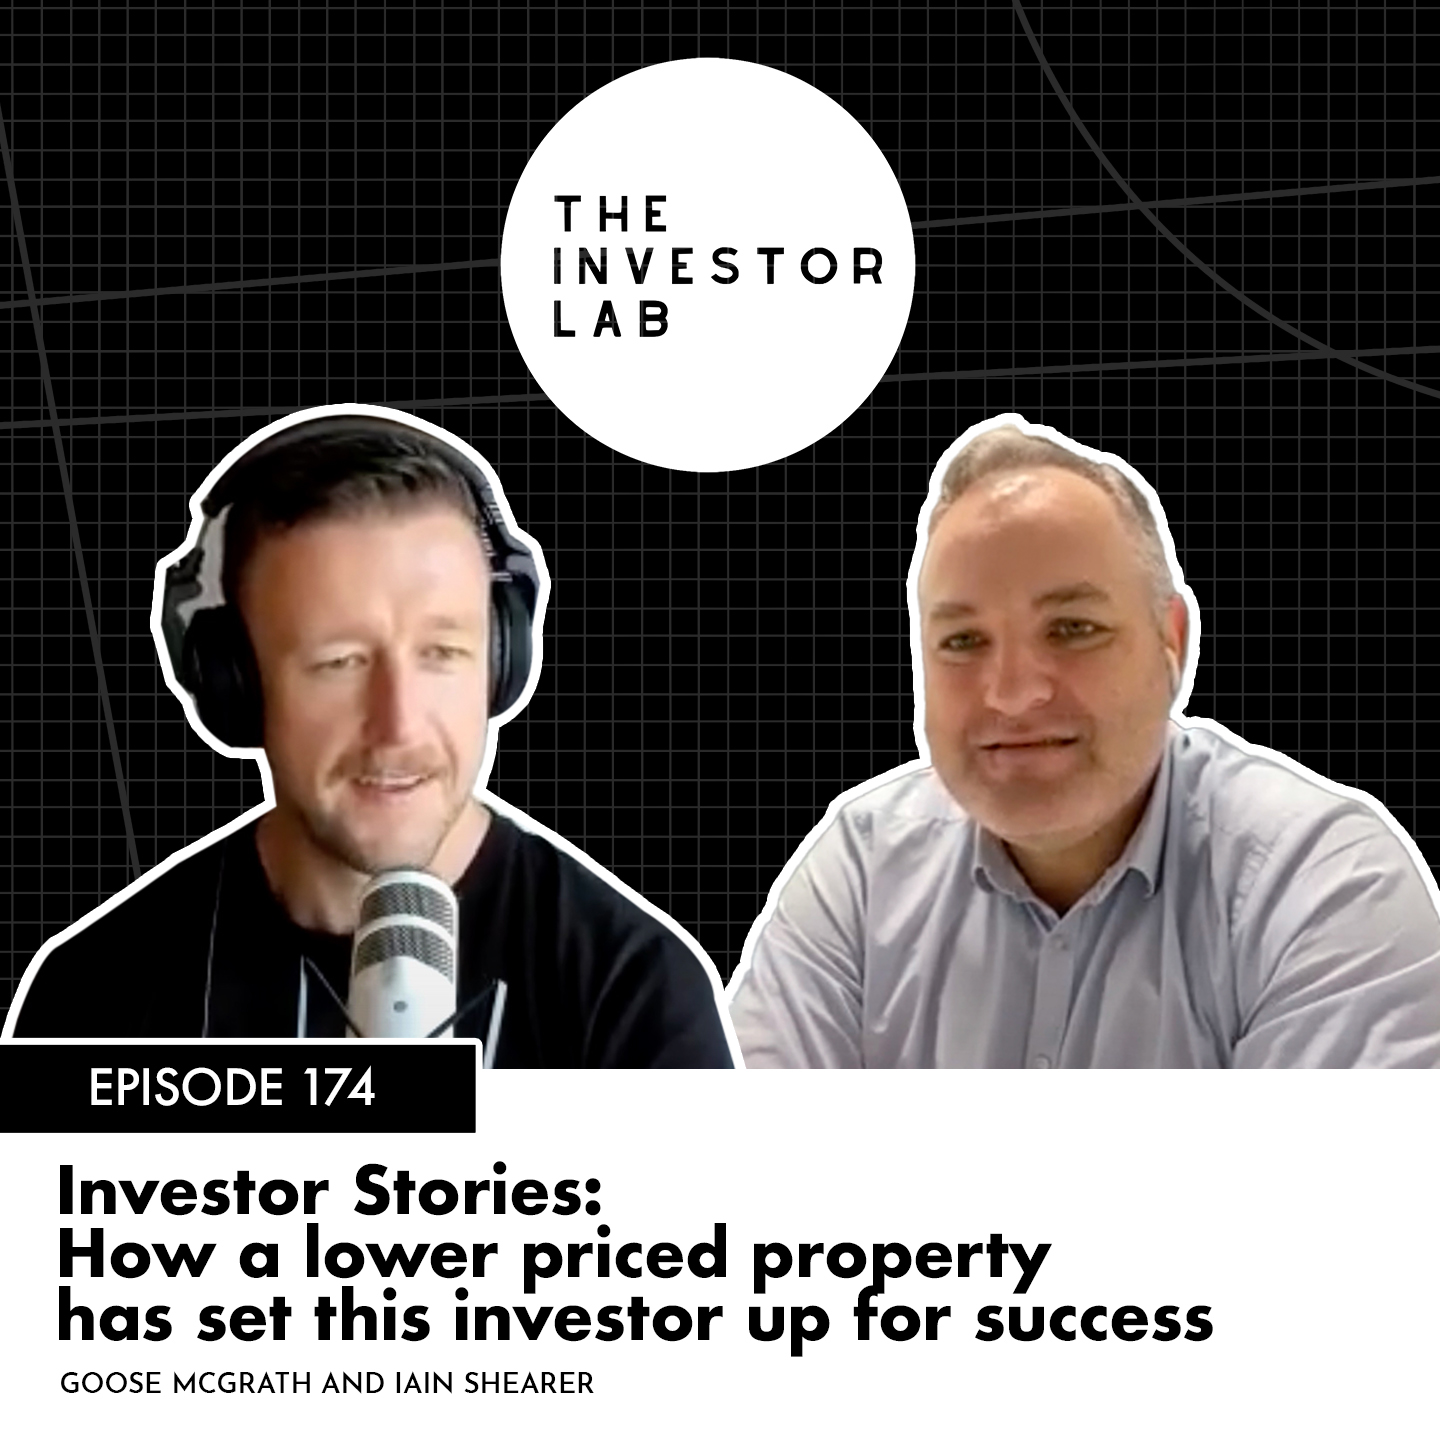 How a lower priced property has set this investor up for success with Iain Shearer